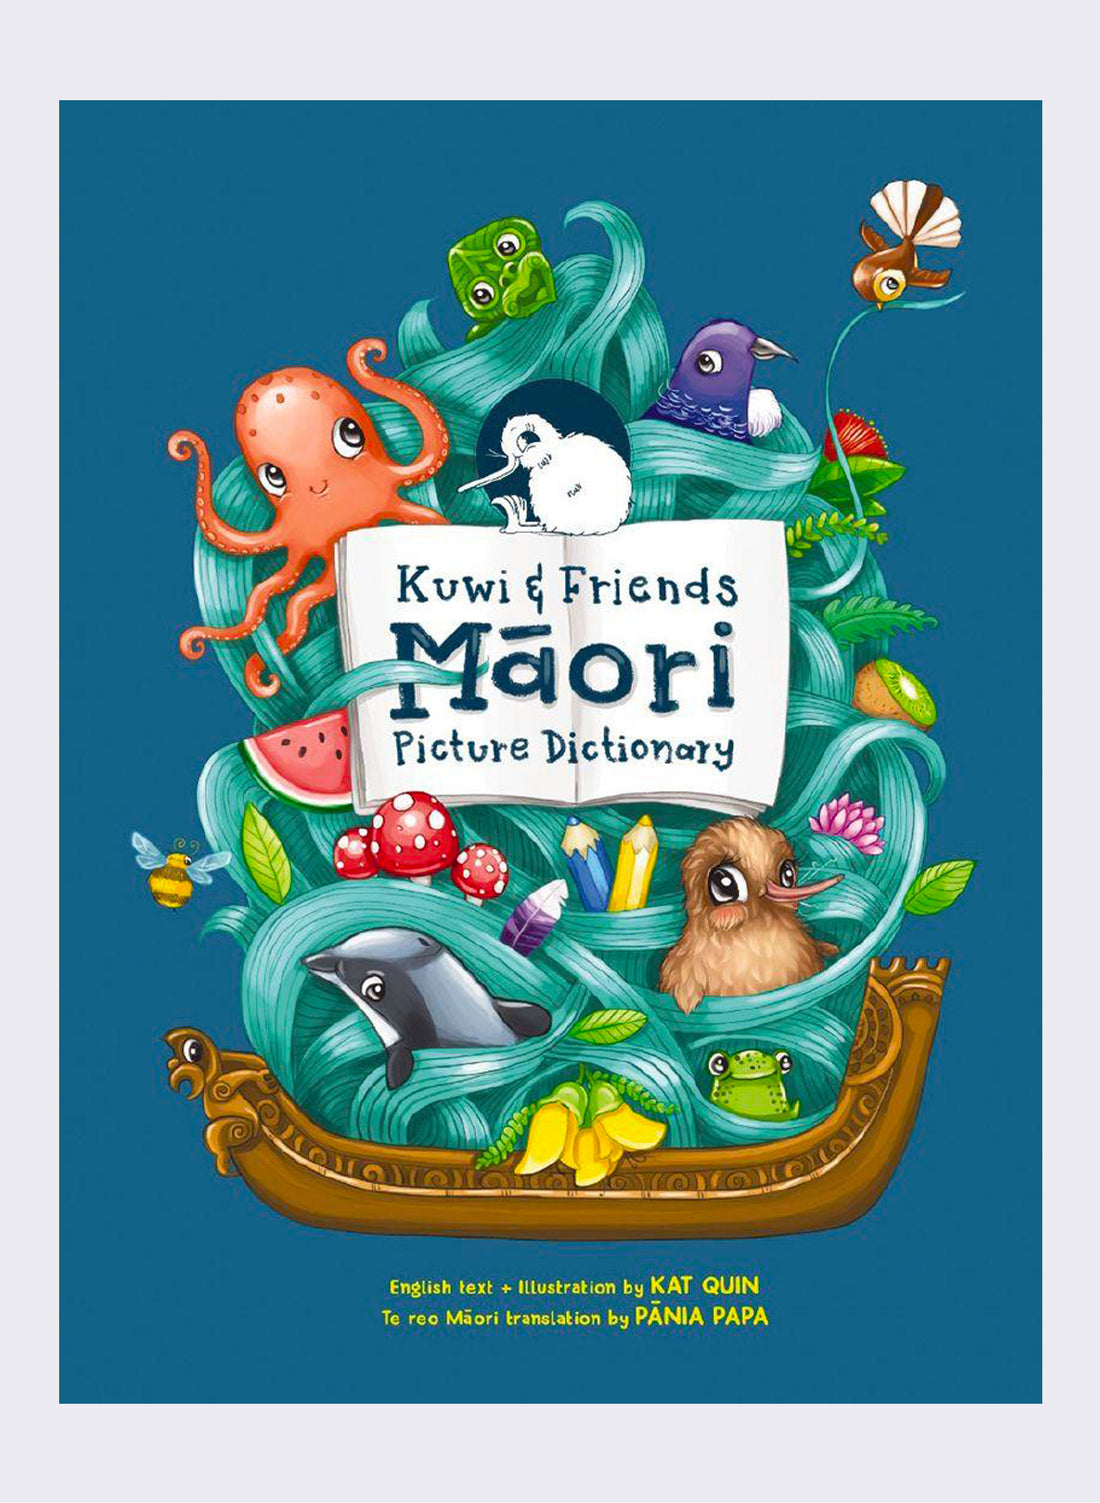 Kuwi &amp; Friends Maori Picture Dictionary by Kat Quin